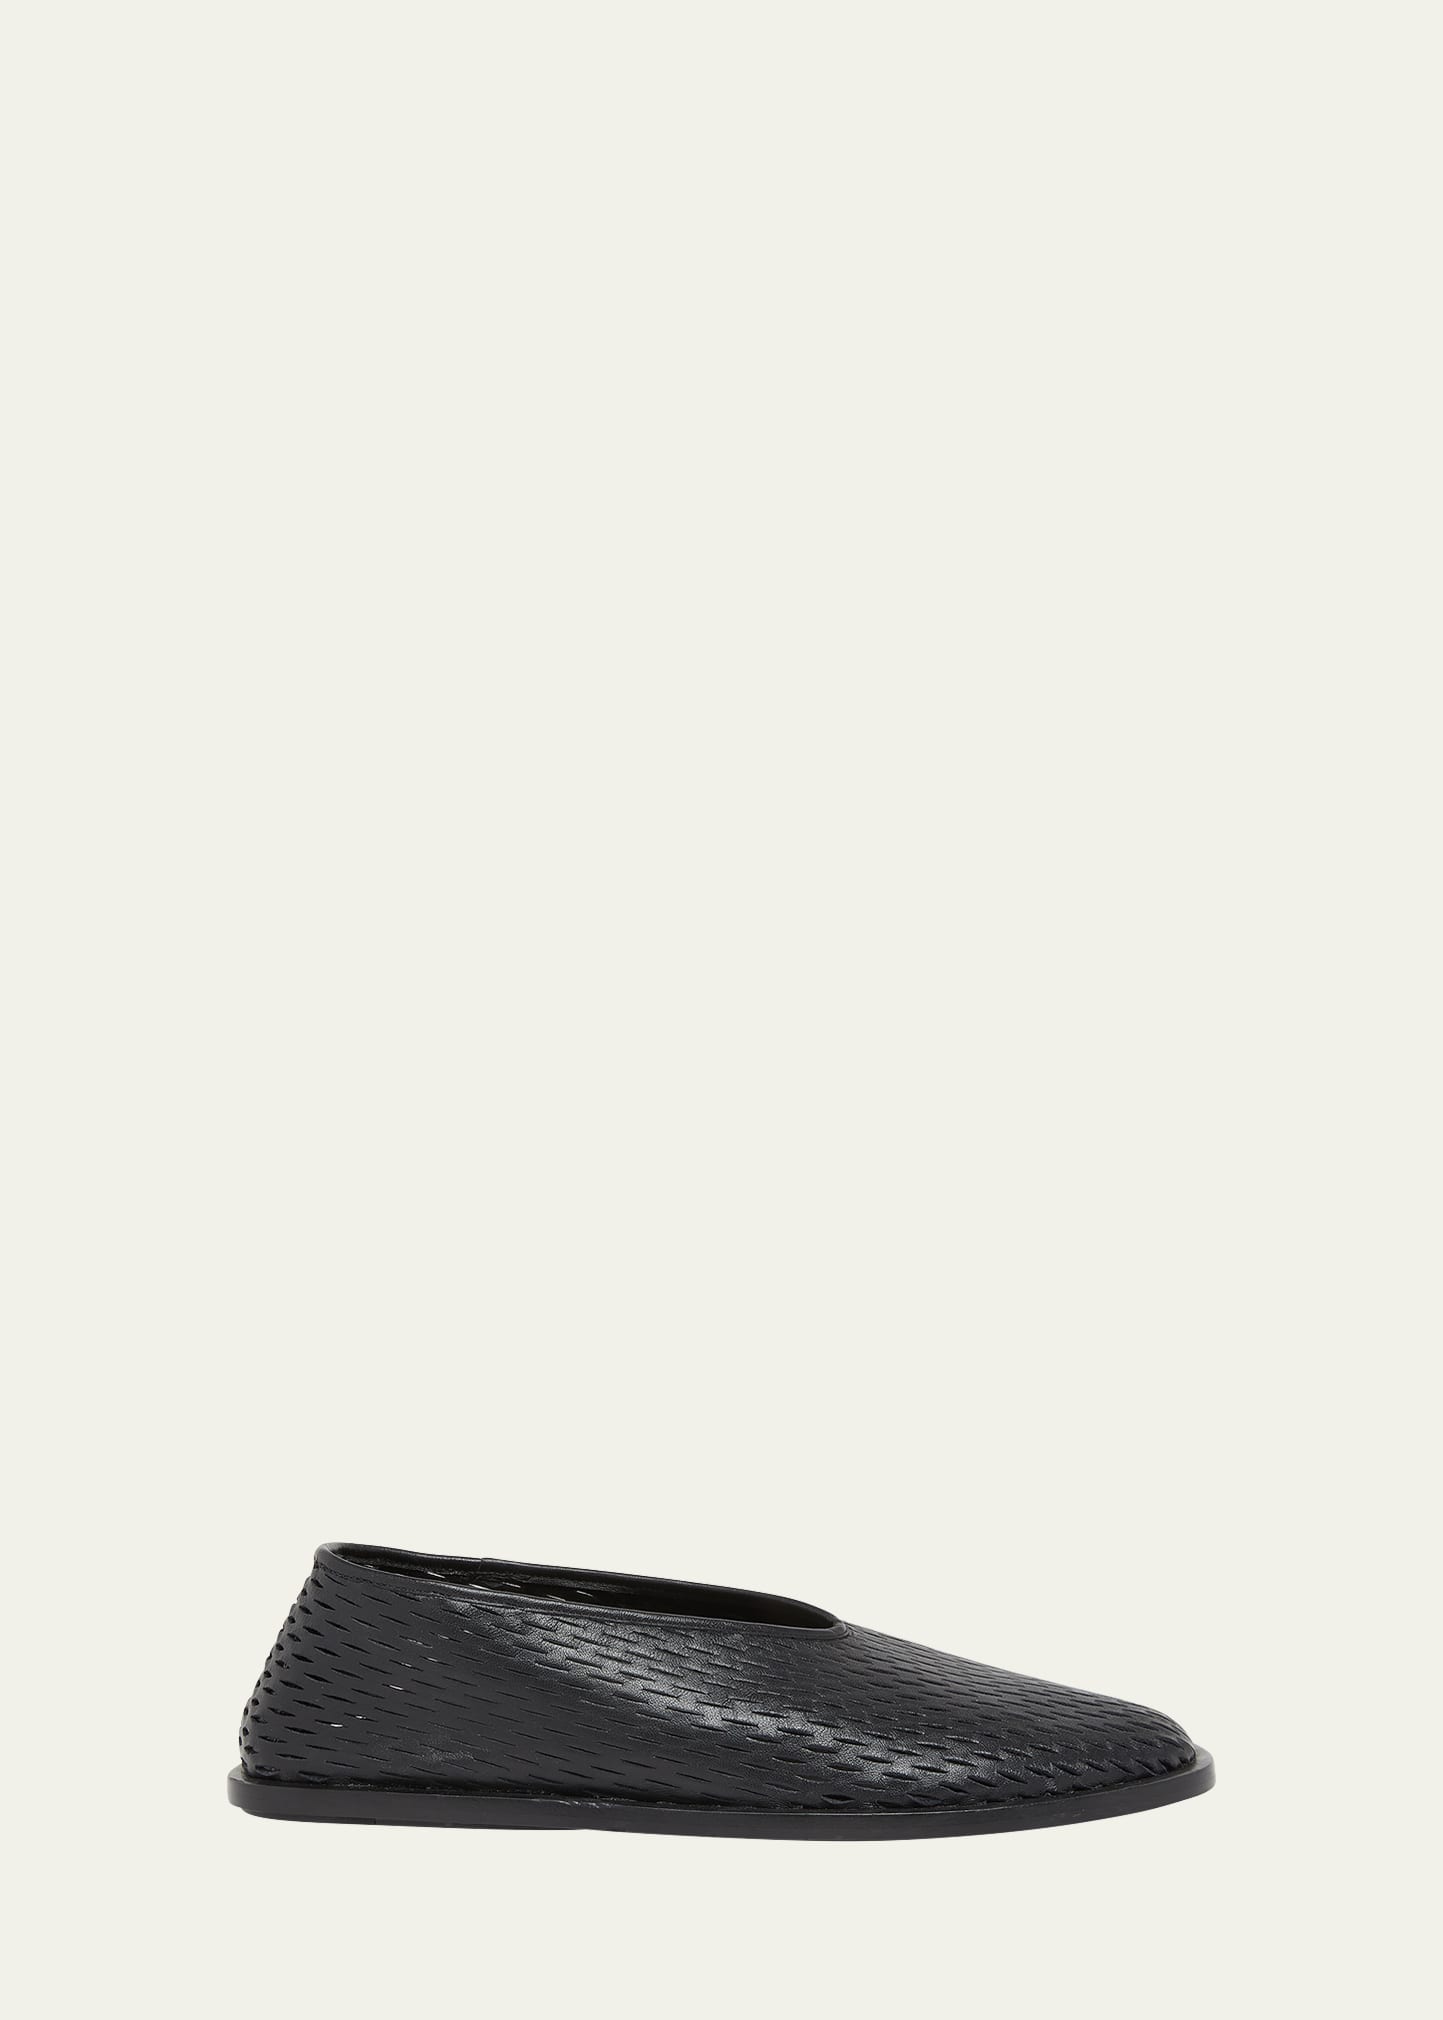 Proenza Schouler Perforated Leather Square-toe Ballerina Flats In Black